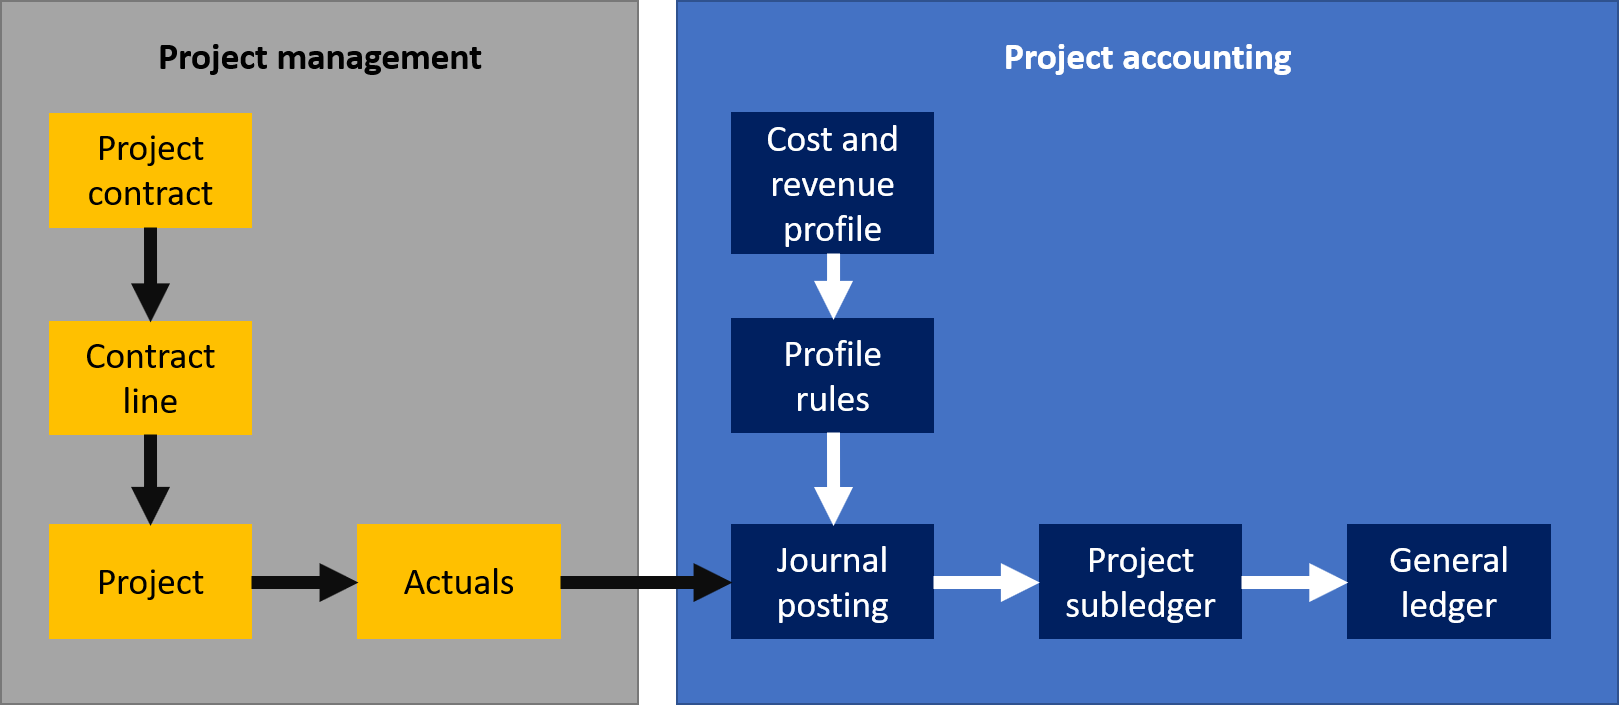 Diagram of the processes in project management and accounting and how project management feeds into project accounting.